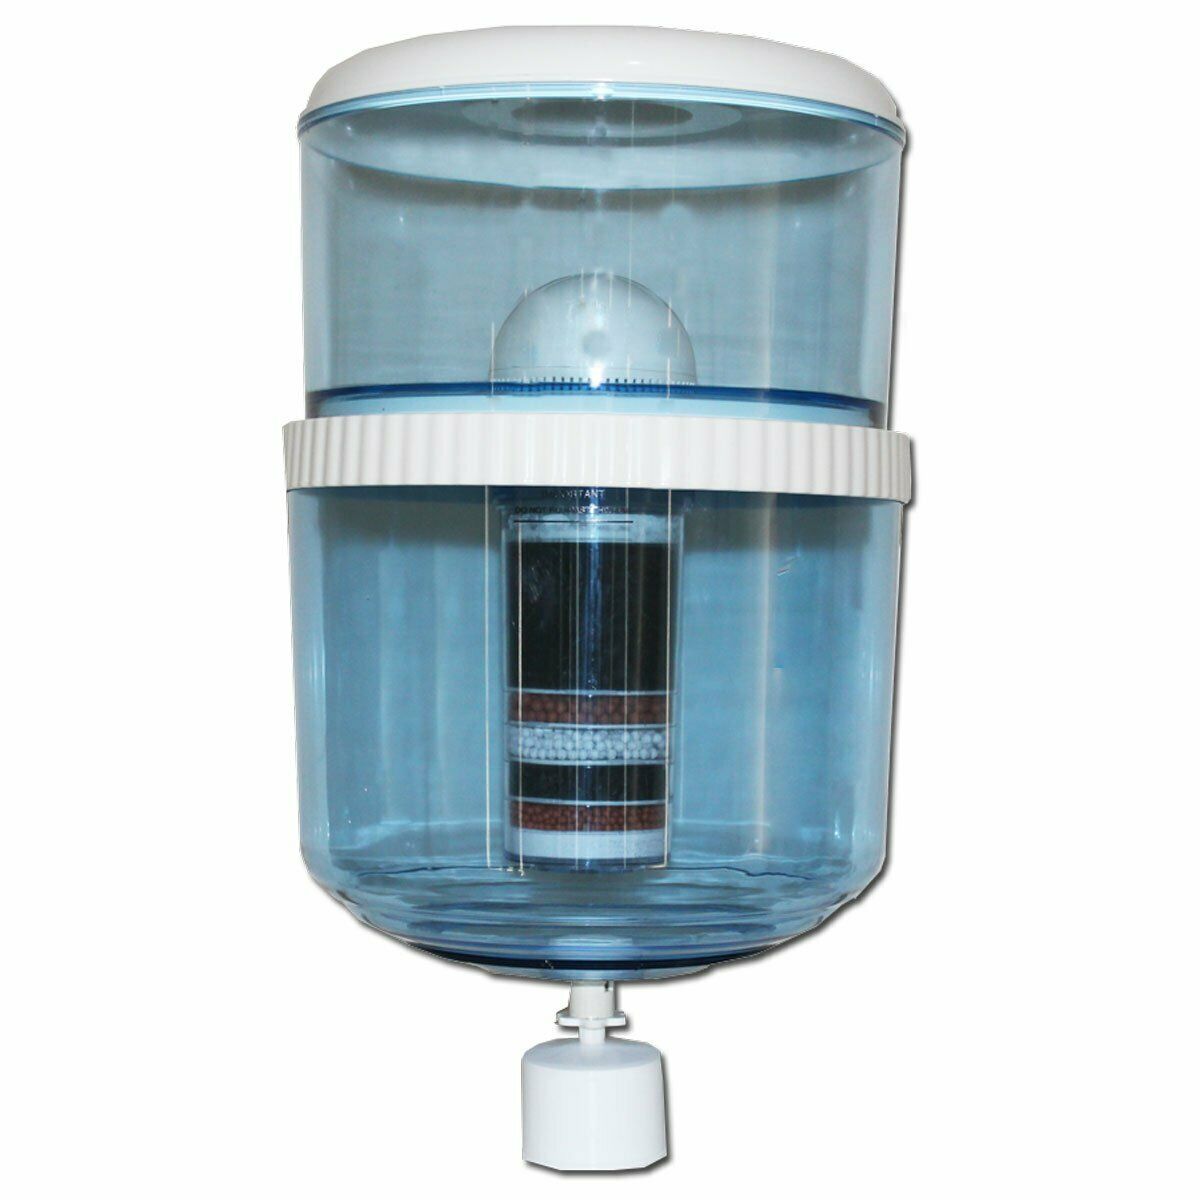 Refillable Water Bottle for Coolers and Dispensers with 8 Stage Filter Cartridge